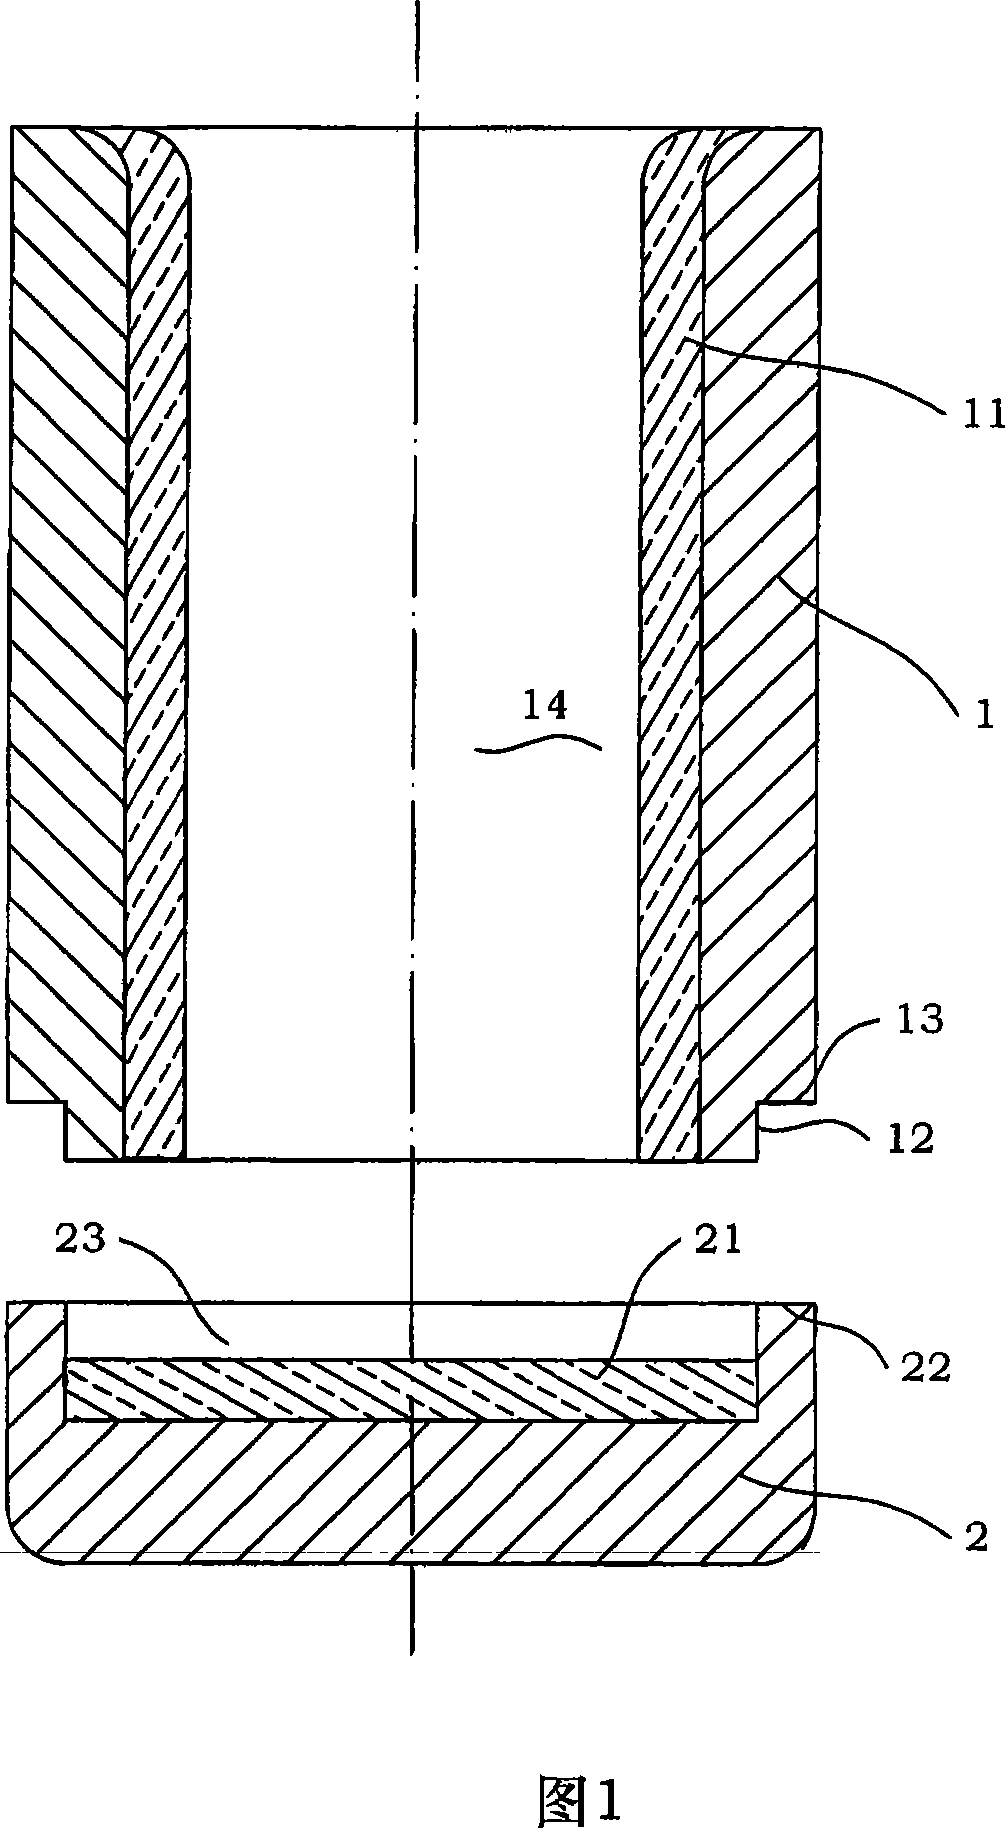 Split graphite crucible and method for preparing carbon coating inside the crucible